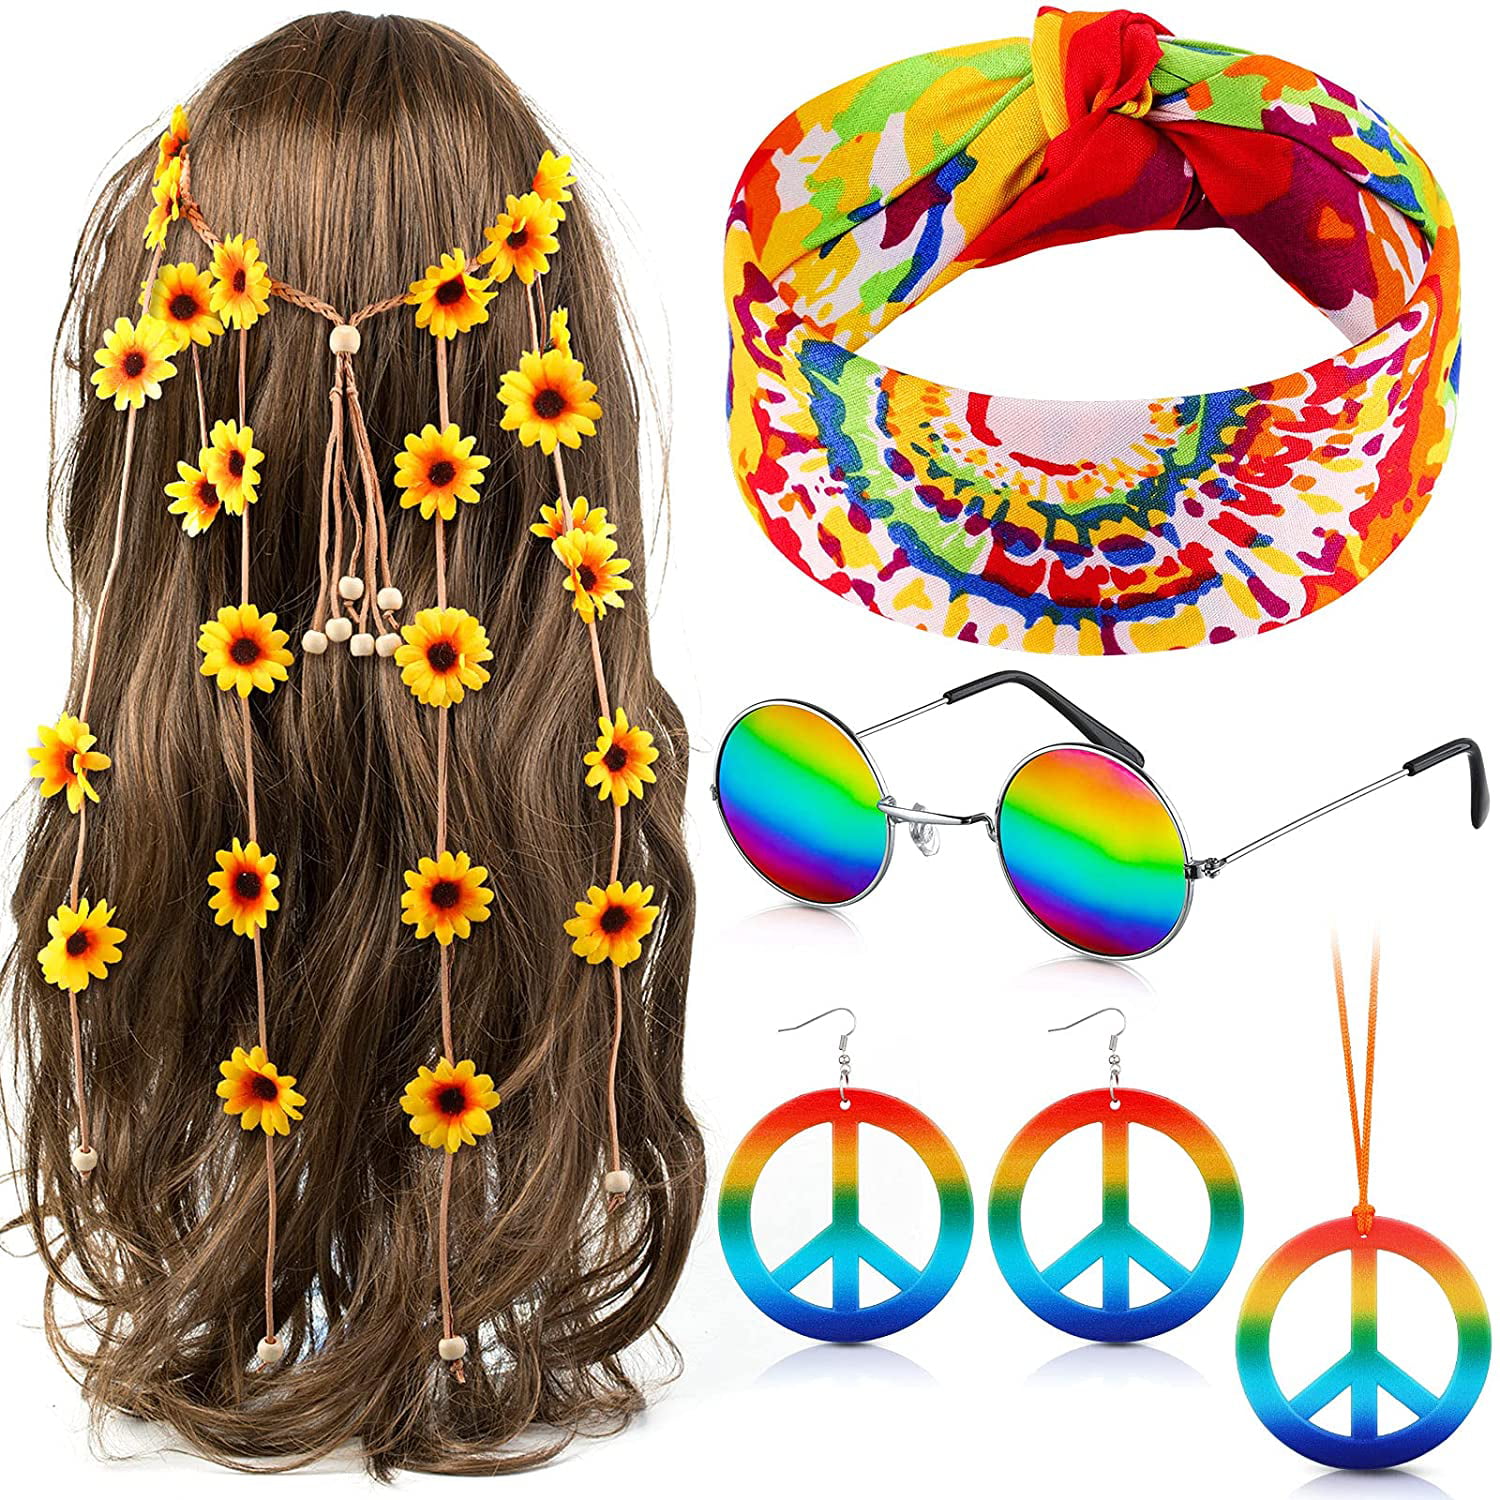 5 Pieces Hippie Costume Set Tie-Dye T-Shirt Rainbow Peace Sign Necklace Earring Sunflower Headband and Sunglasses 